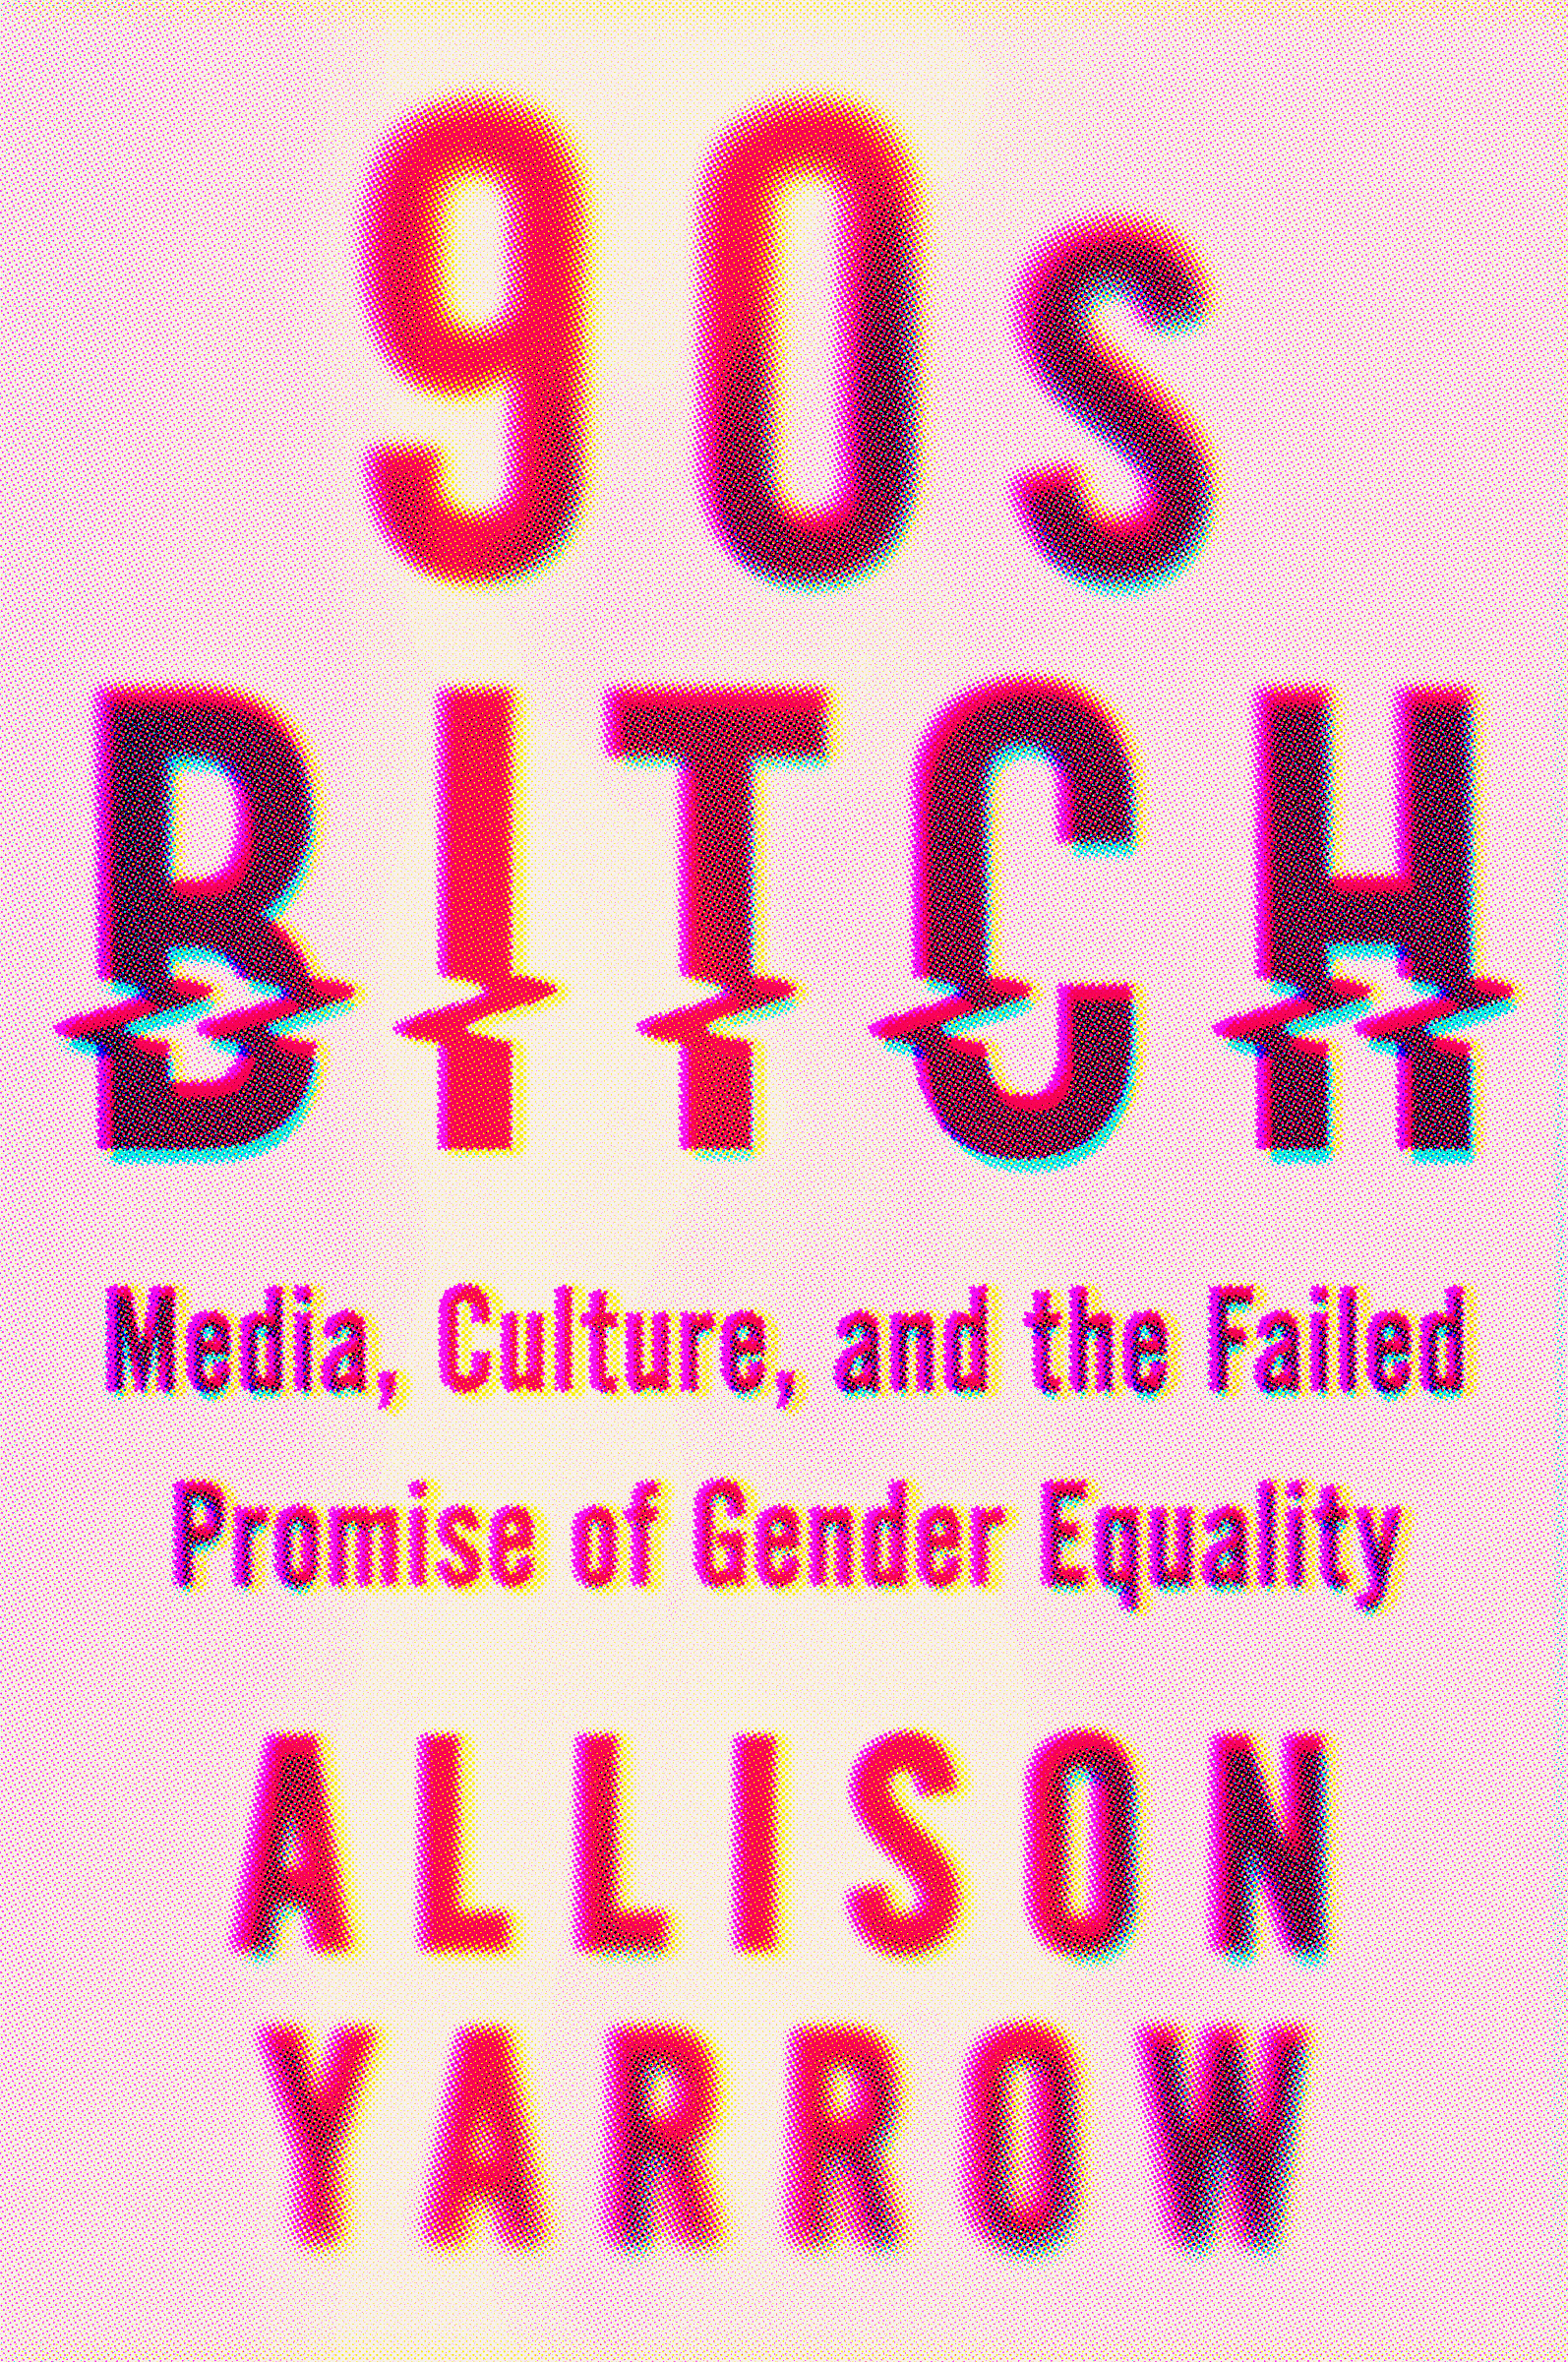 90s Bitch: Media, Culture, and the Failed Promise of Gender Equality (Harper Perennial, 2018). (Courtesy of HarperCollins Publishers)